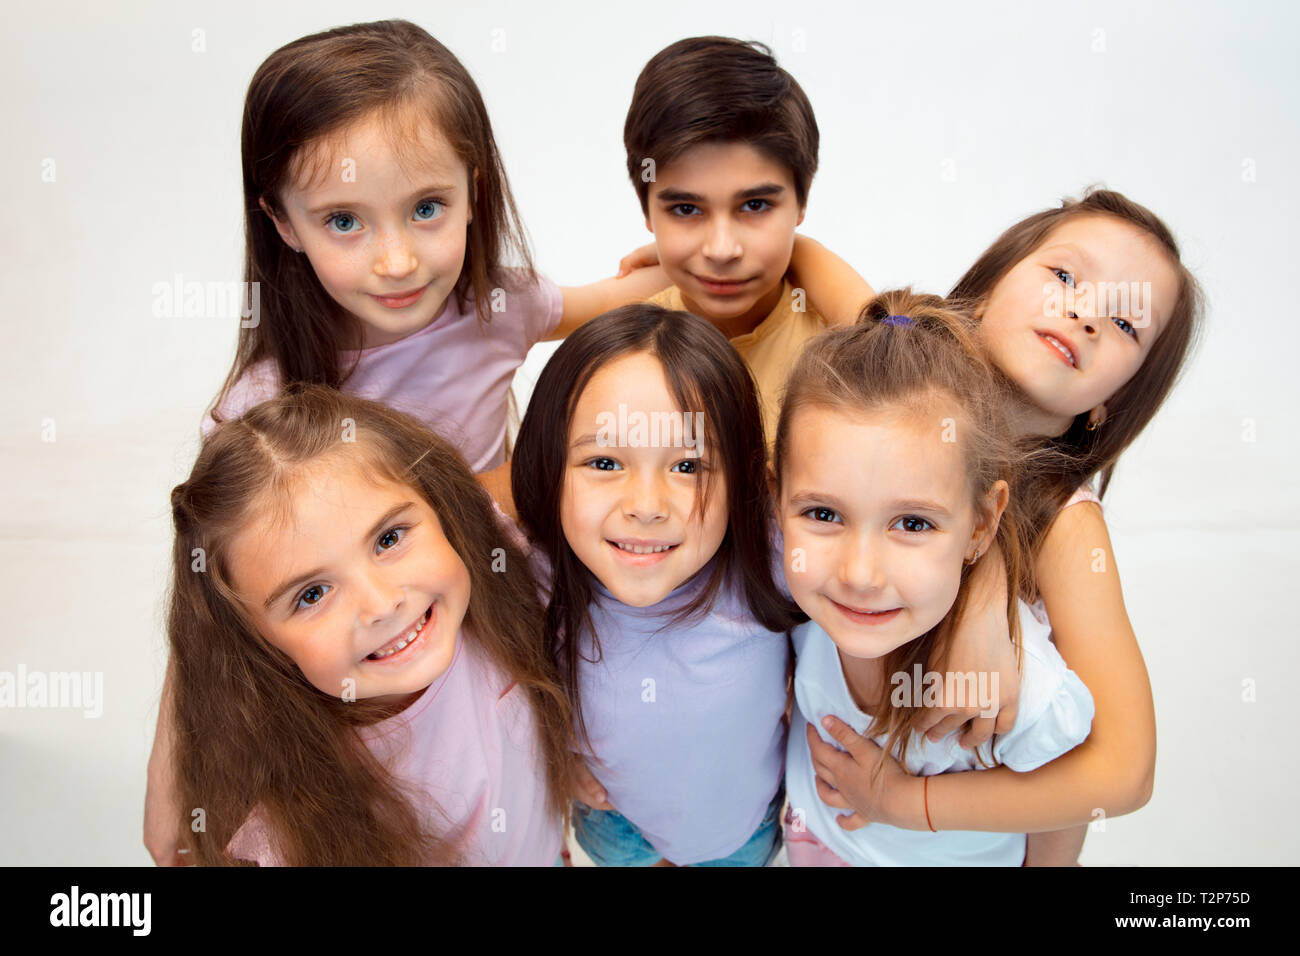 The Portrait Of Happy Cute Little Kids Boy And Girls In Stylish Casual Clothes Looking At Camera Against White Studio Wall Kids Fashion And Human Emo Stock Photo Alamy